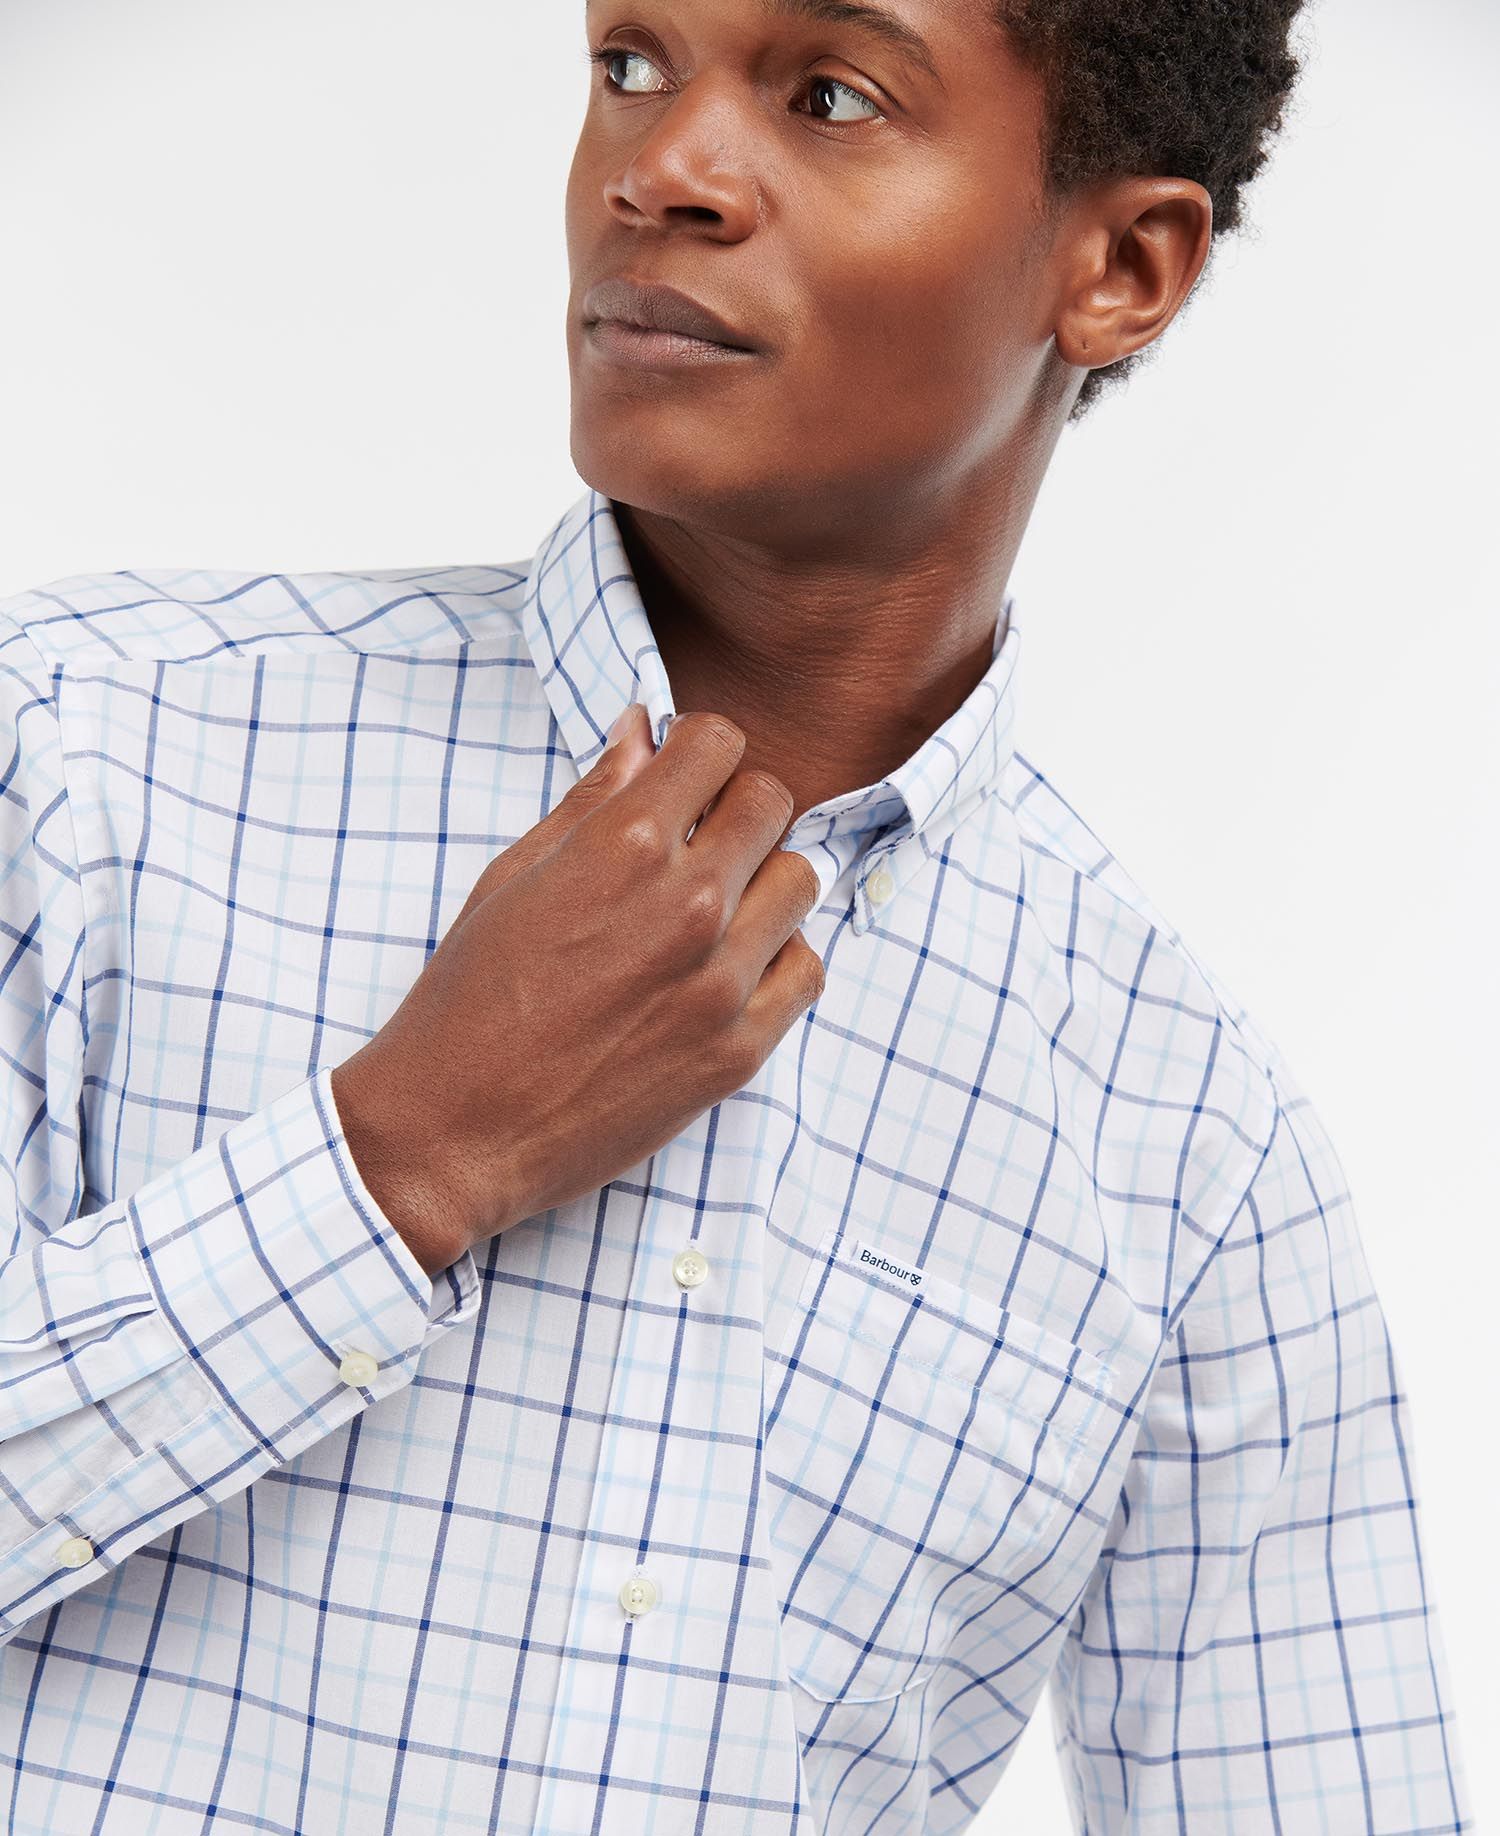 Shop the Barbour Bradwell Tailored Shirt here at Barbour | Barbour